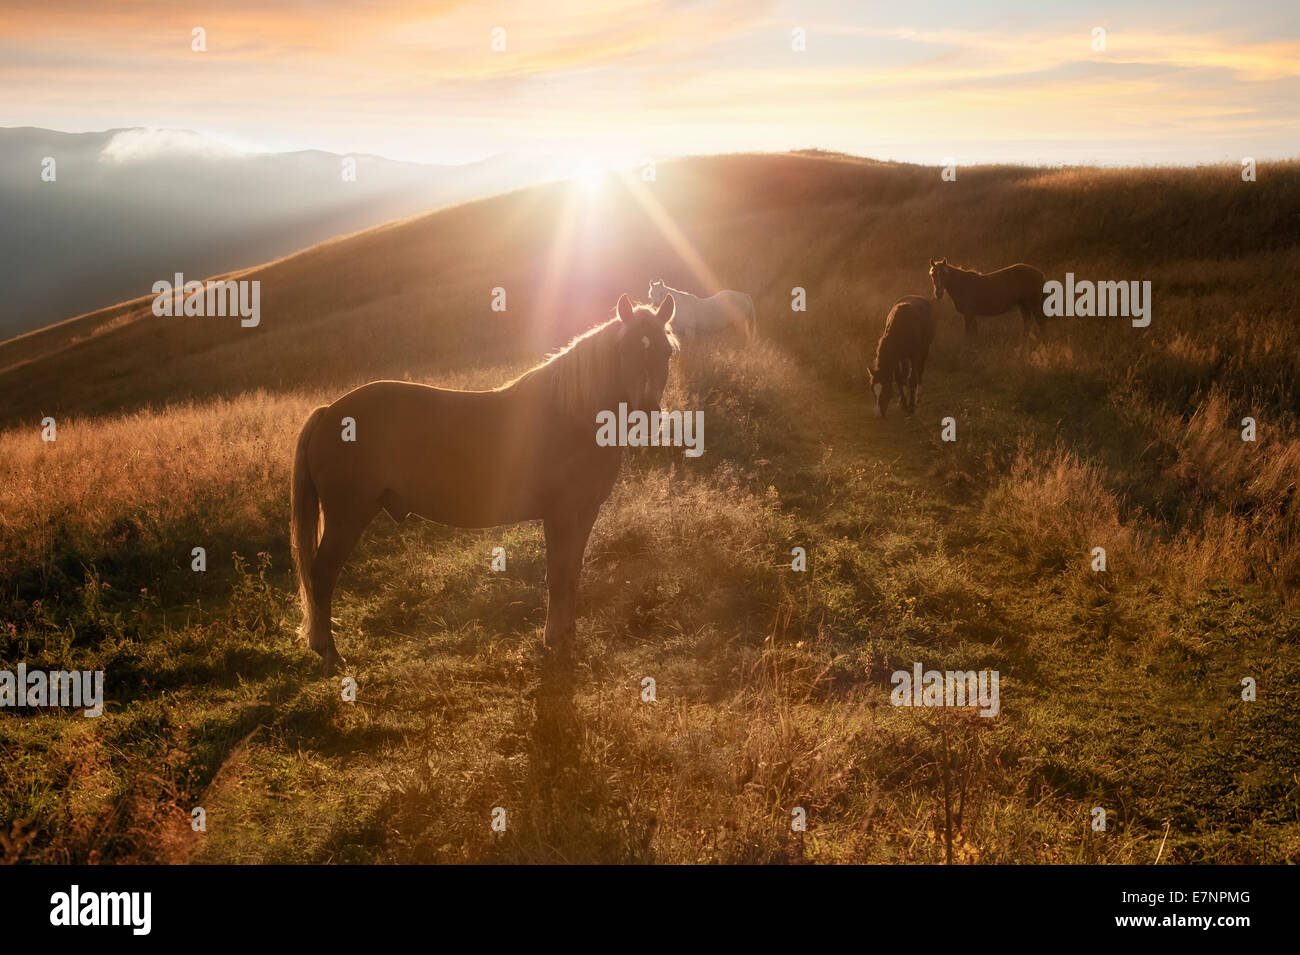 Sunset in mountains nature background. Horses silhouette at haze and sunbeams on summer meadow. Image in vintage retro hipster s Stock Photo